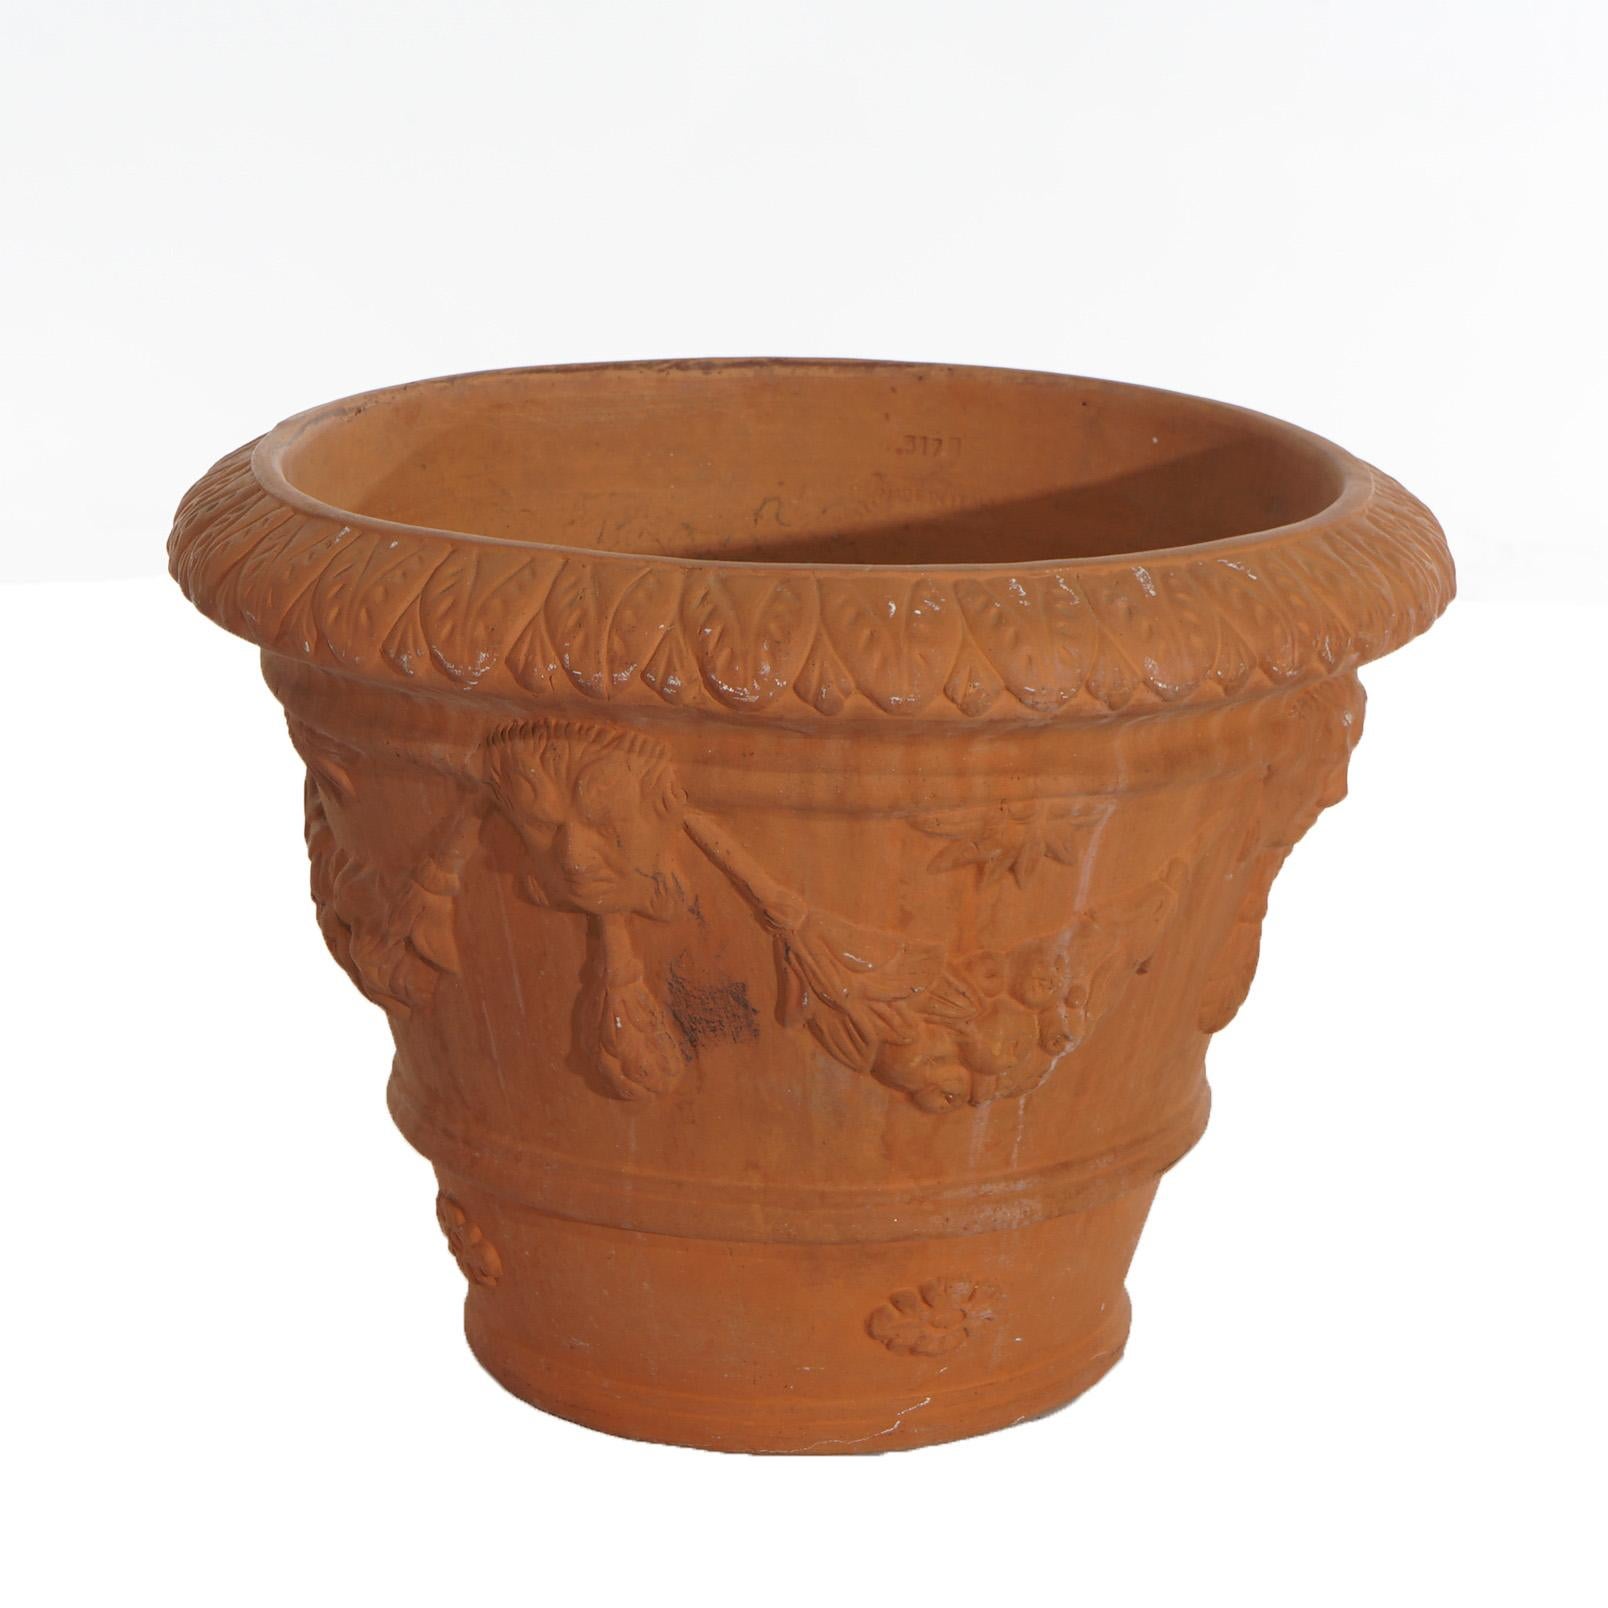 Classical Terracotta Pottery Jardiniere with Figural Masks & Fruit Swag 20th C For Sale 1